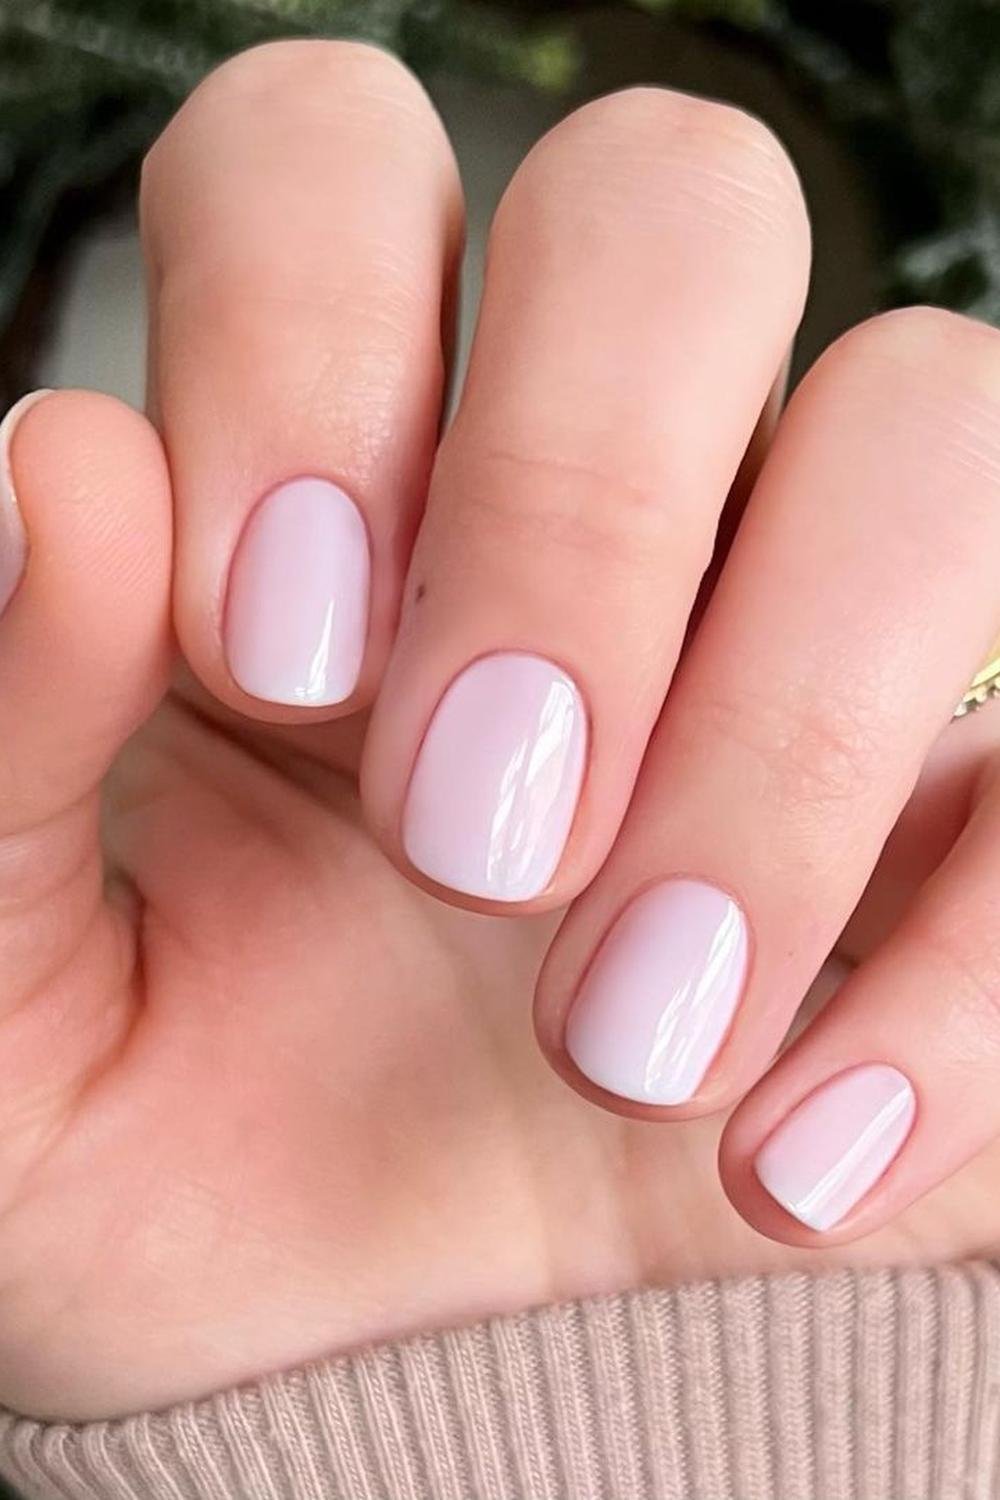 2 - Picture of Squoval Nails